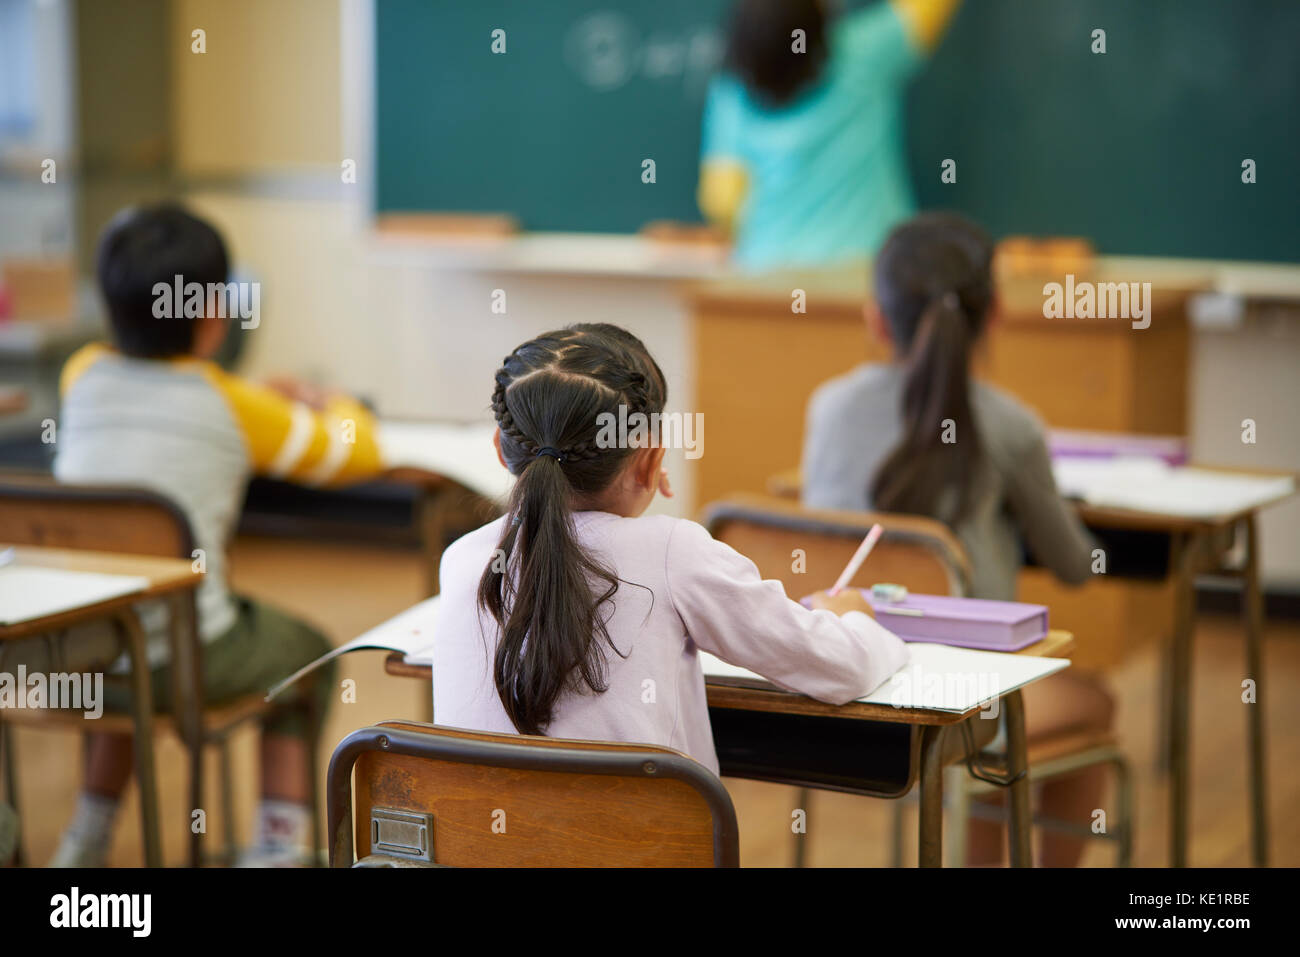 Japanese elementary school kids in the classroom Stock Photo